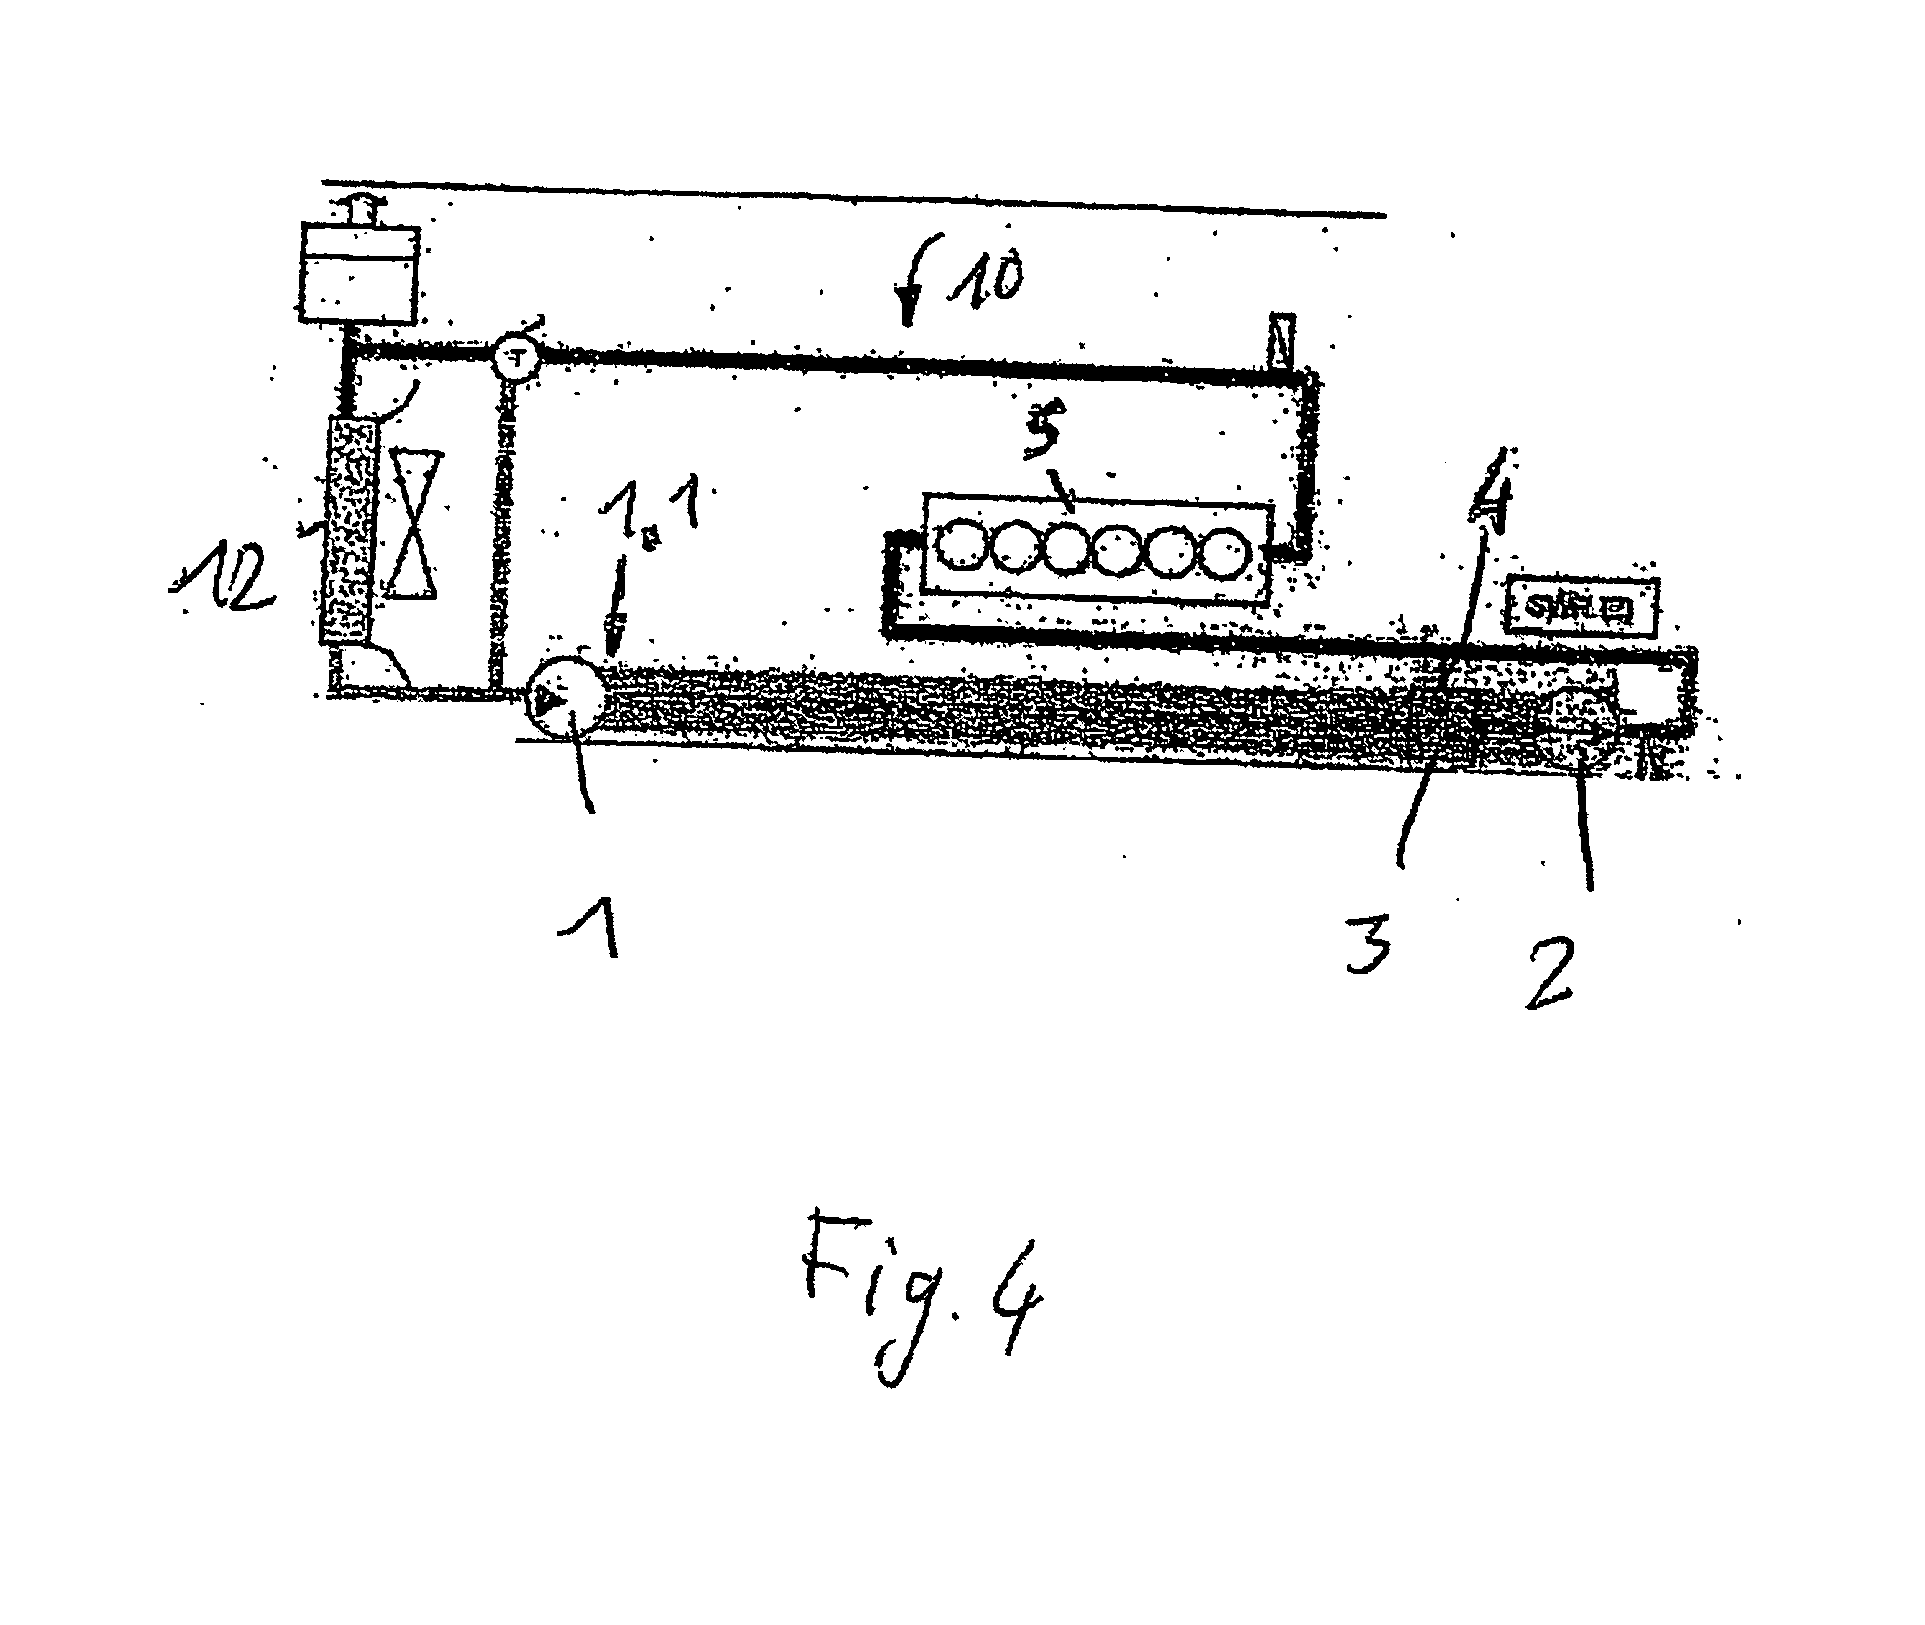 Motor vehicle coolant circuit comprising a pump and a retarder